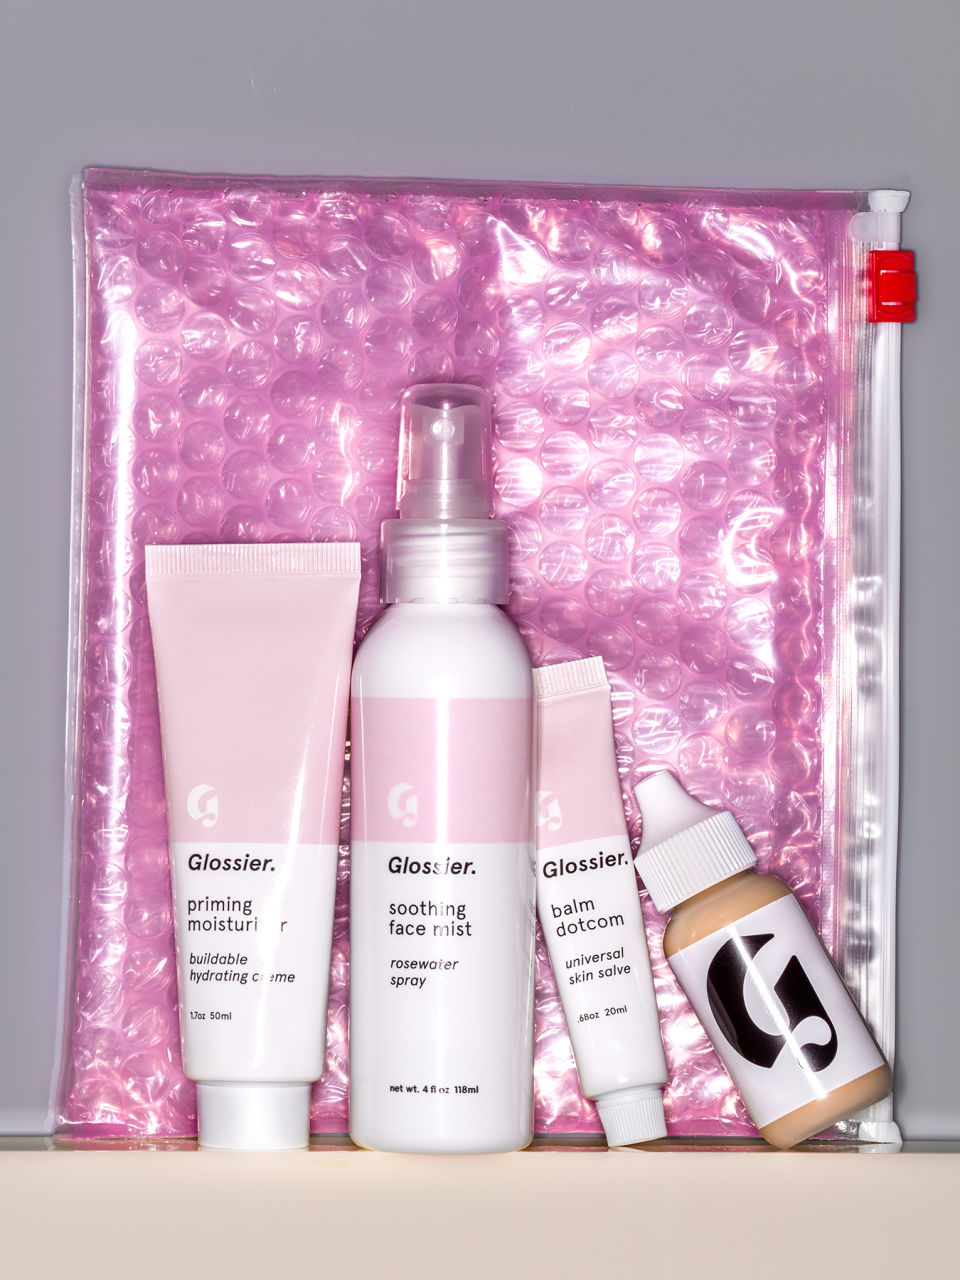 How Glossier Turned Into a $400 Million Business in Four Years